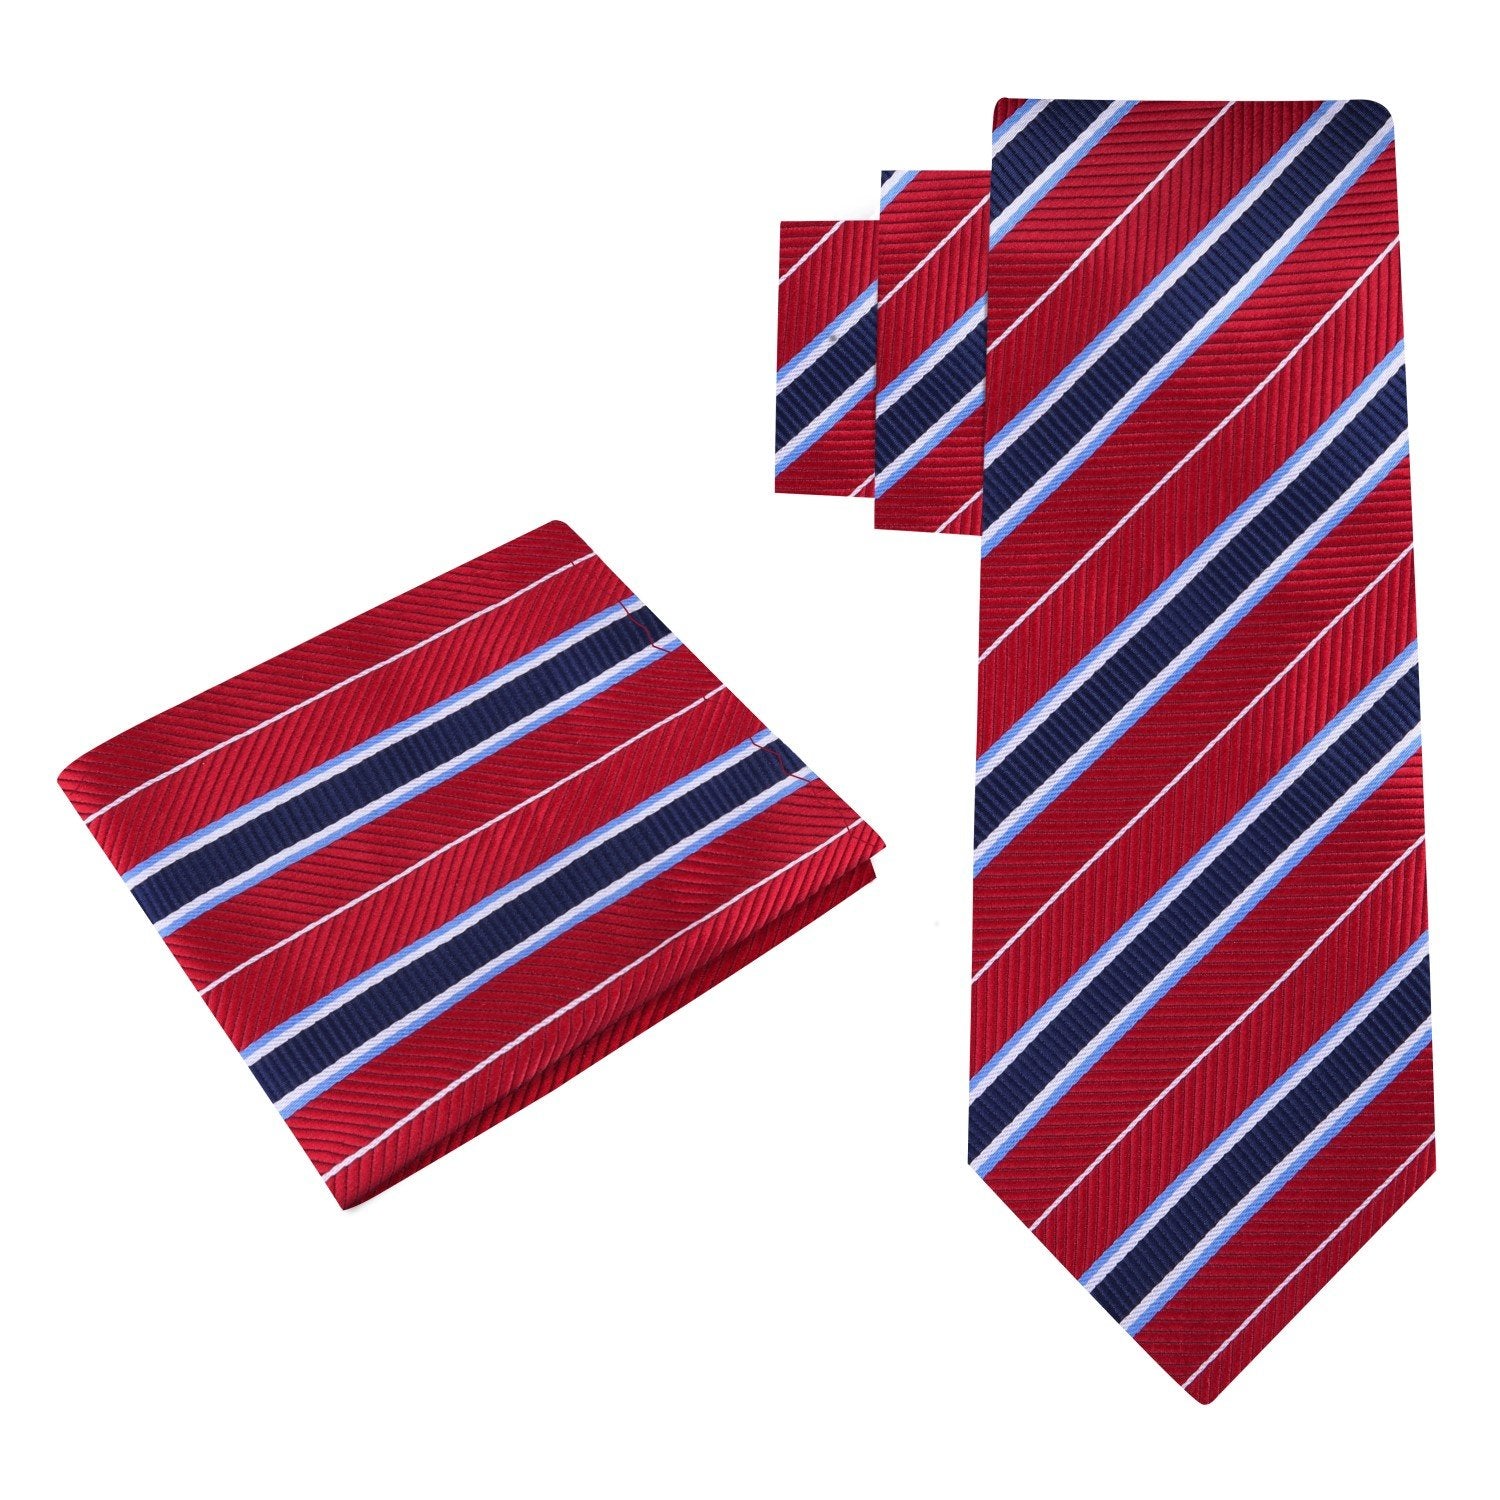 Alt View: Red, Blue, White Stripe Tie and Pocket Square